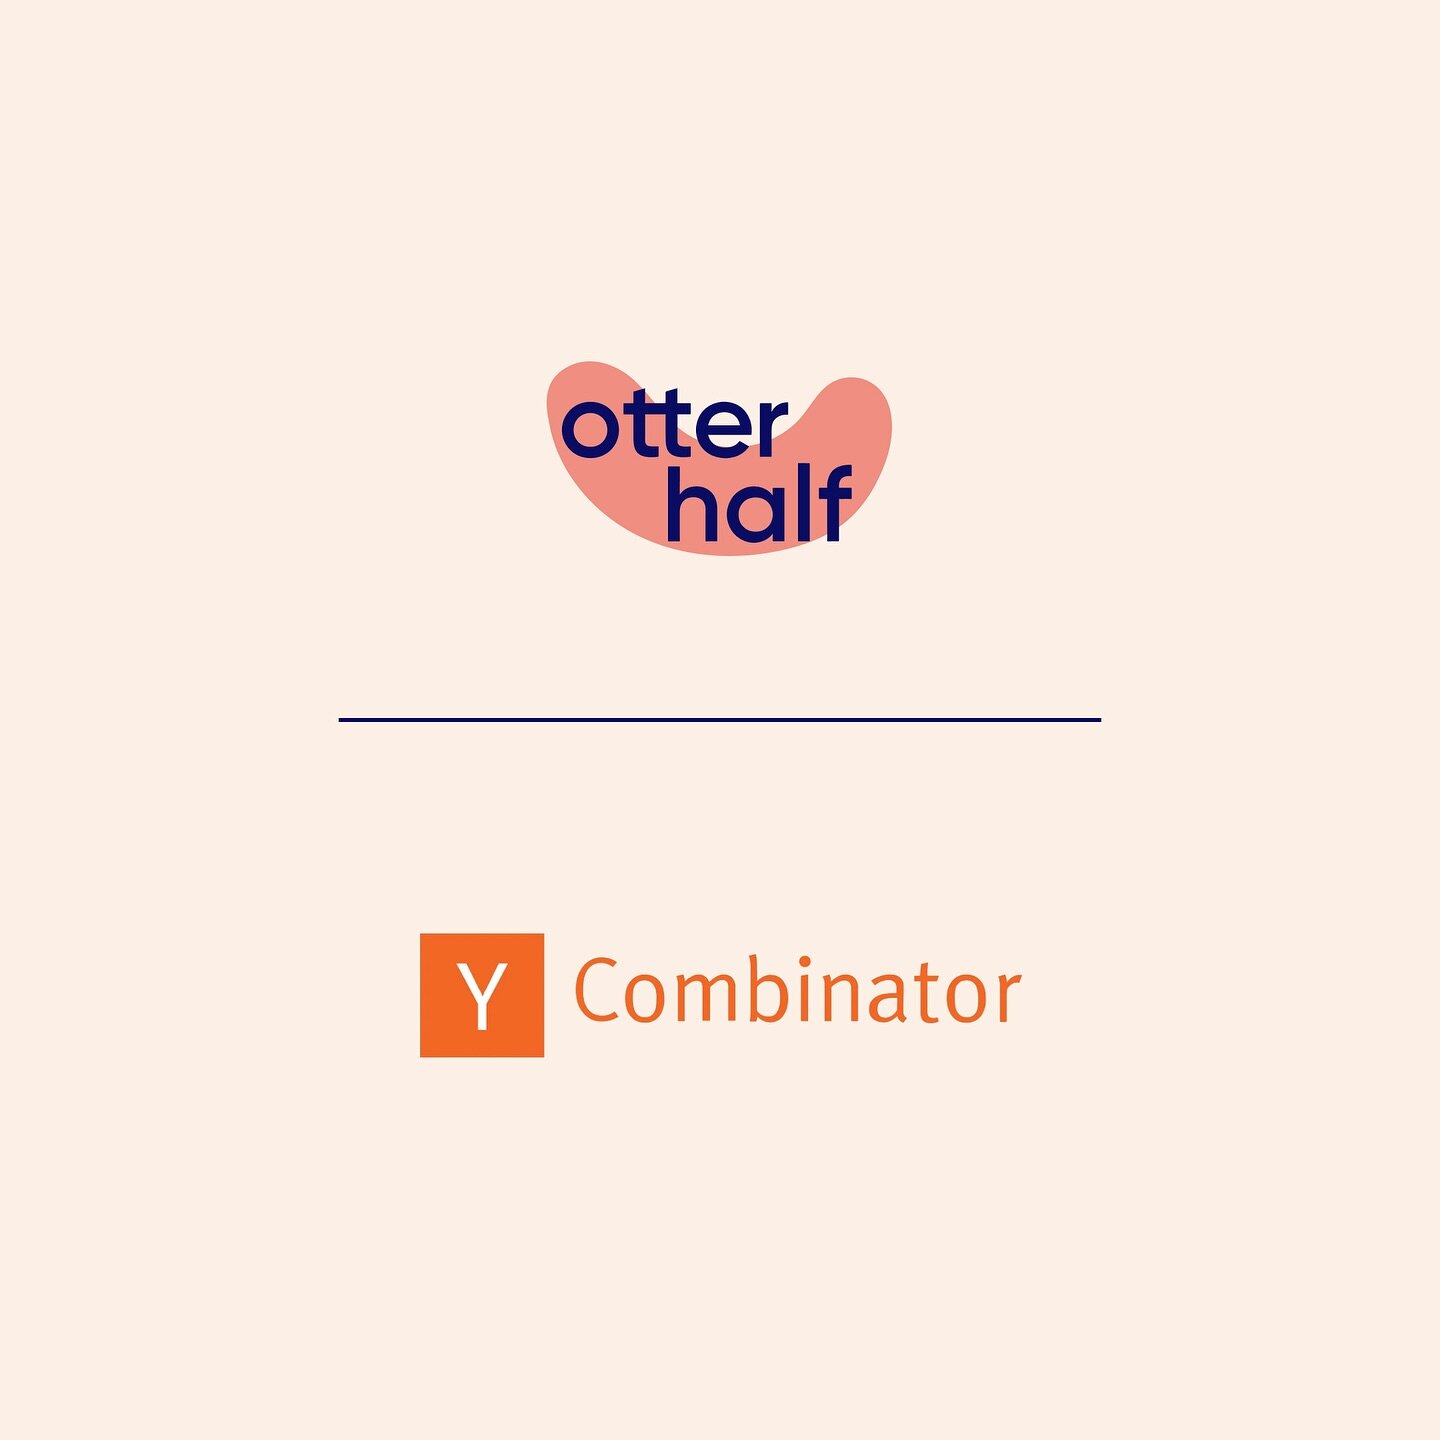 From today onwards, OtterHalf can be found on the Y Combinator Deals page, and every YC-backed company, both past and present, will have the opportunity to redeem an exclusive deal with us. We are thrilled to see where this partnership takes us, espe